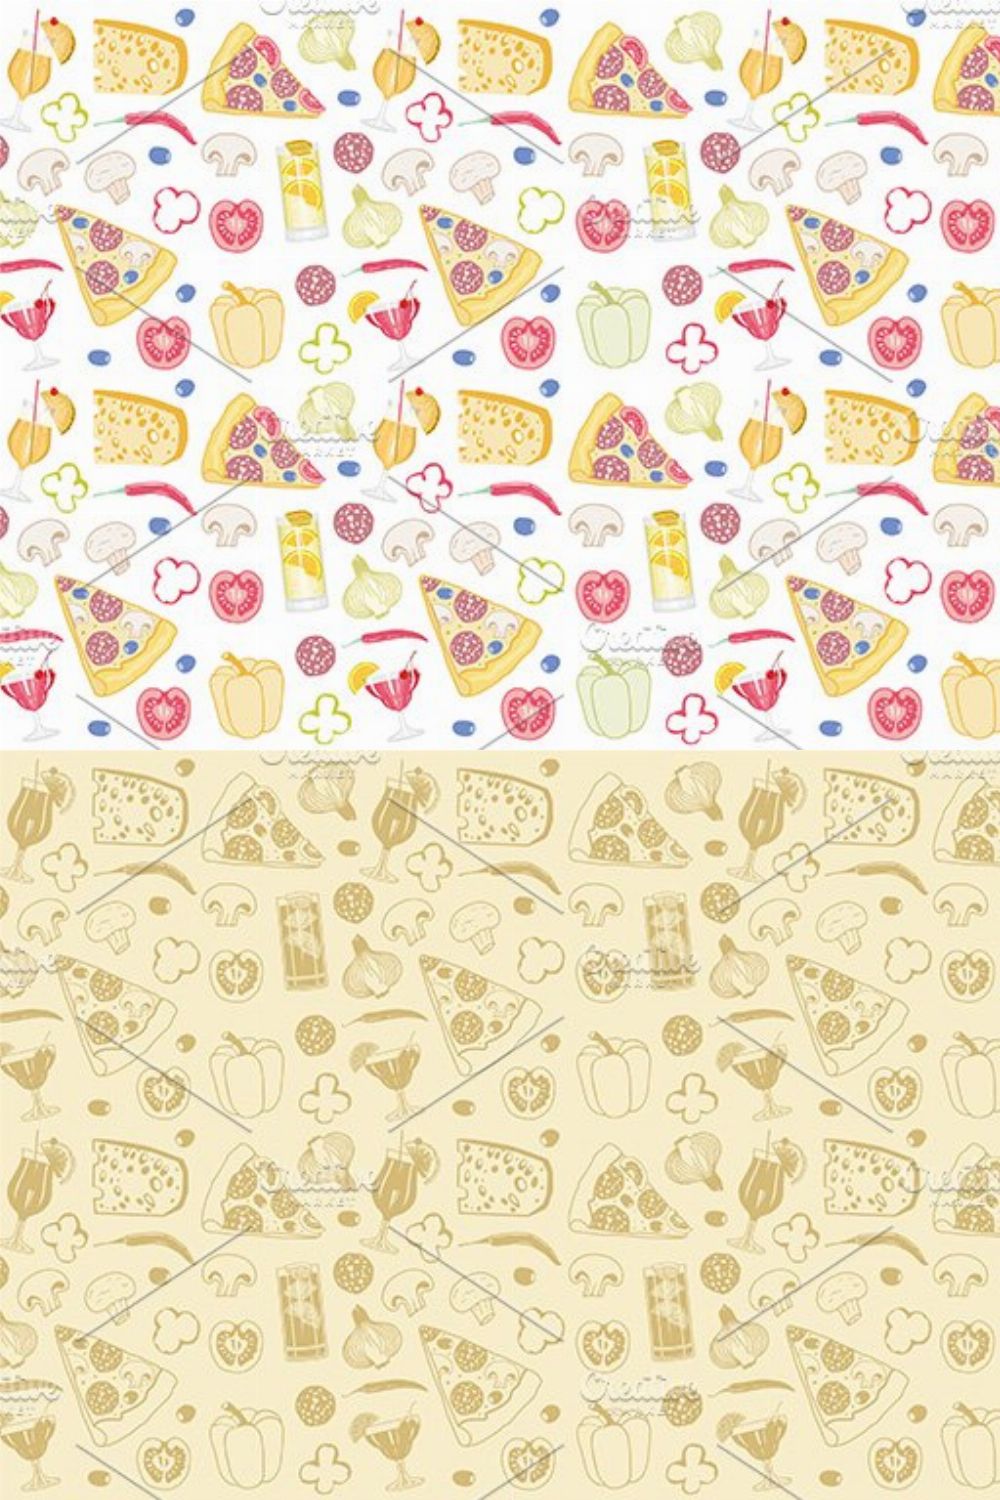 Pizza seamless pattern pinterest preview image.